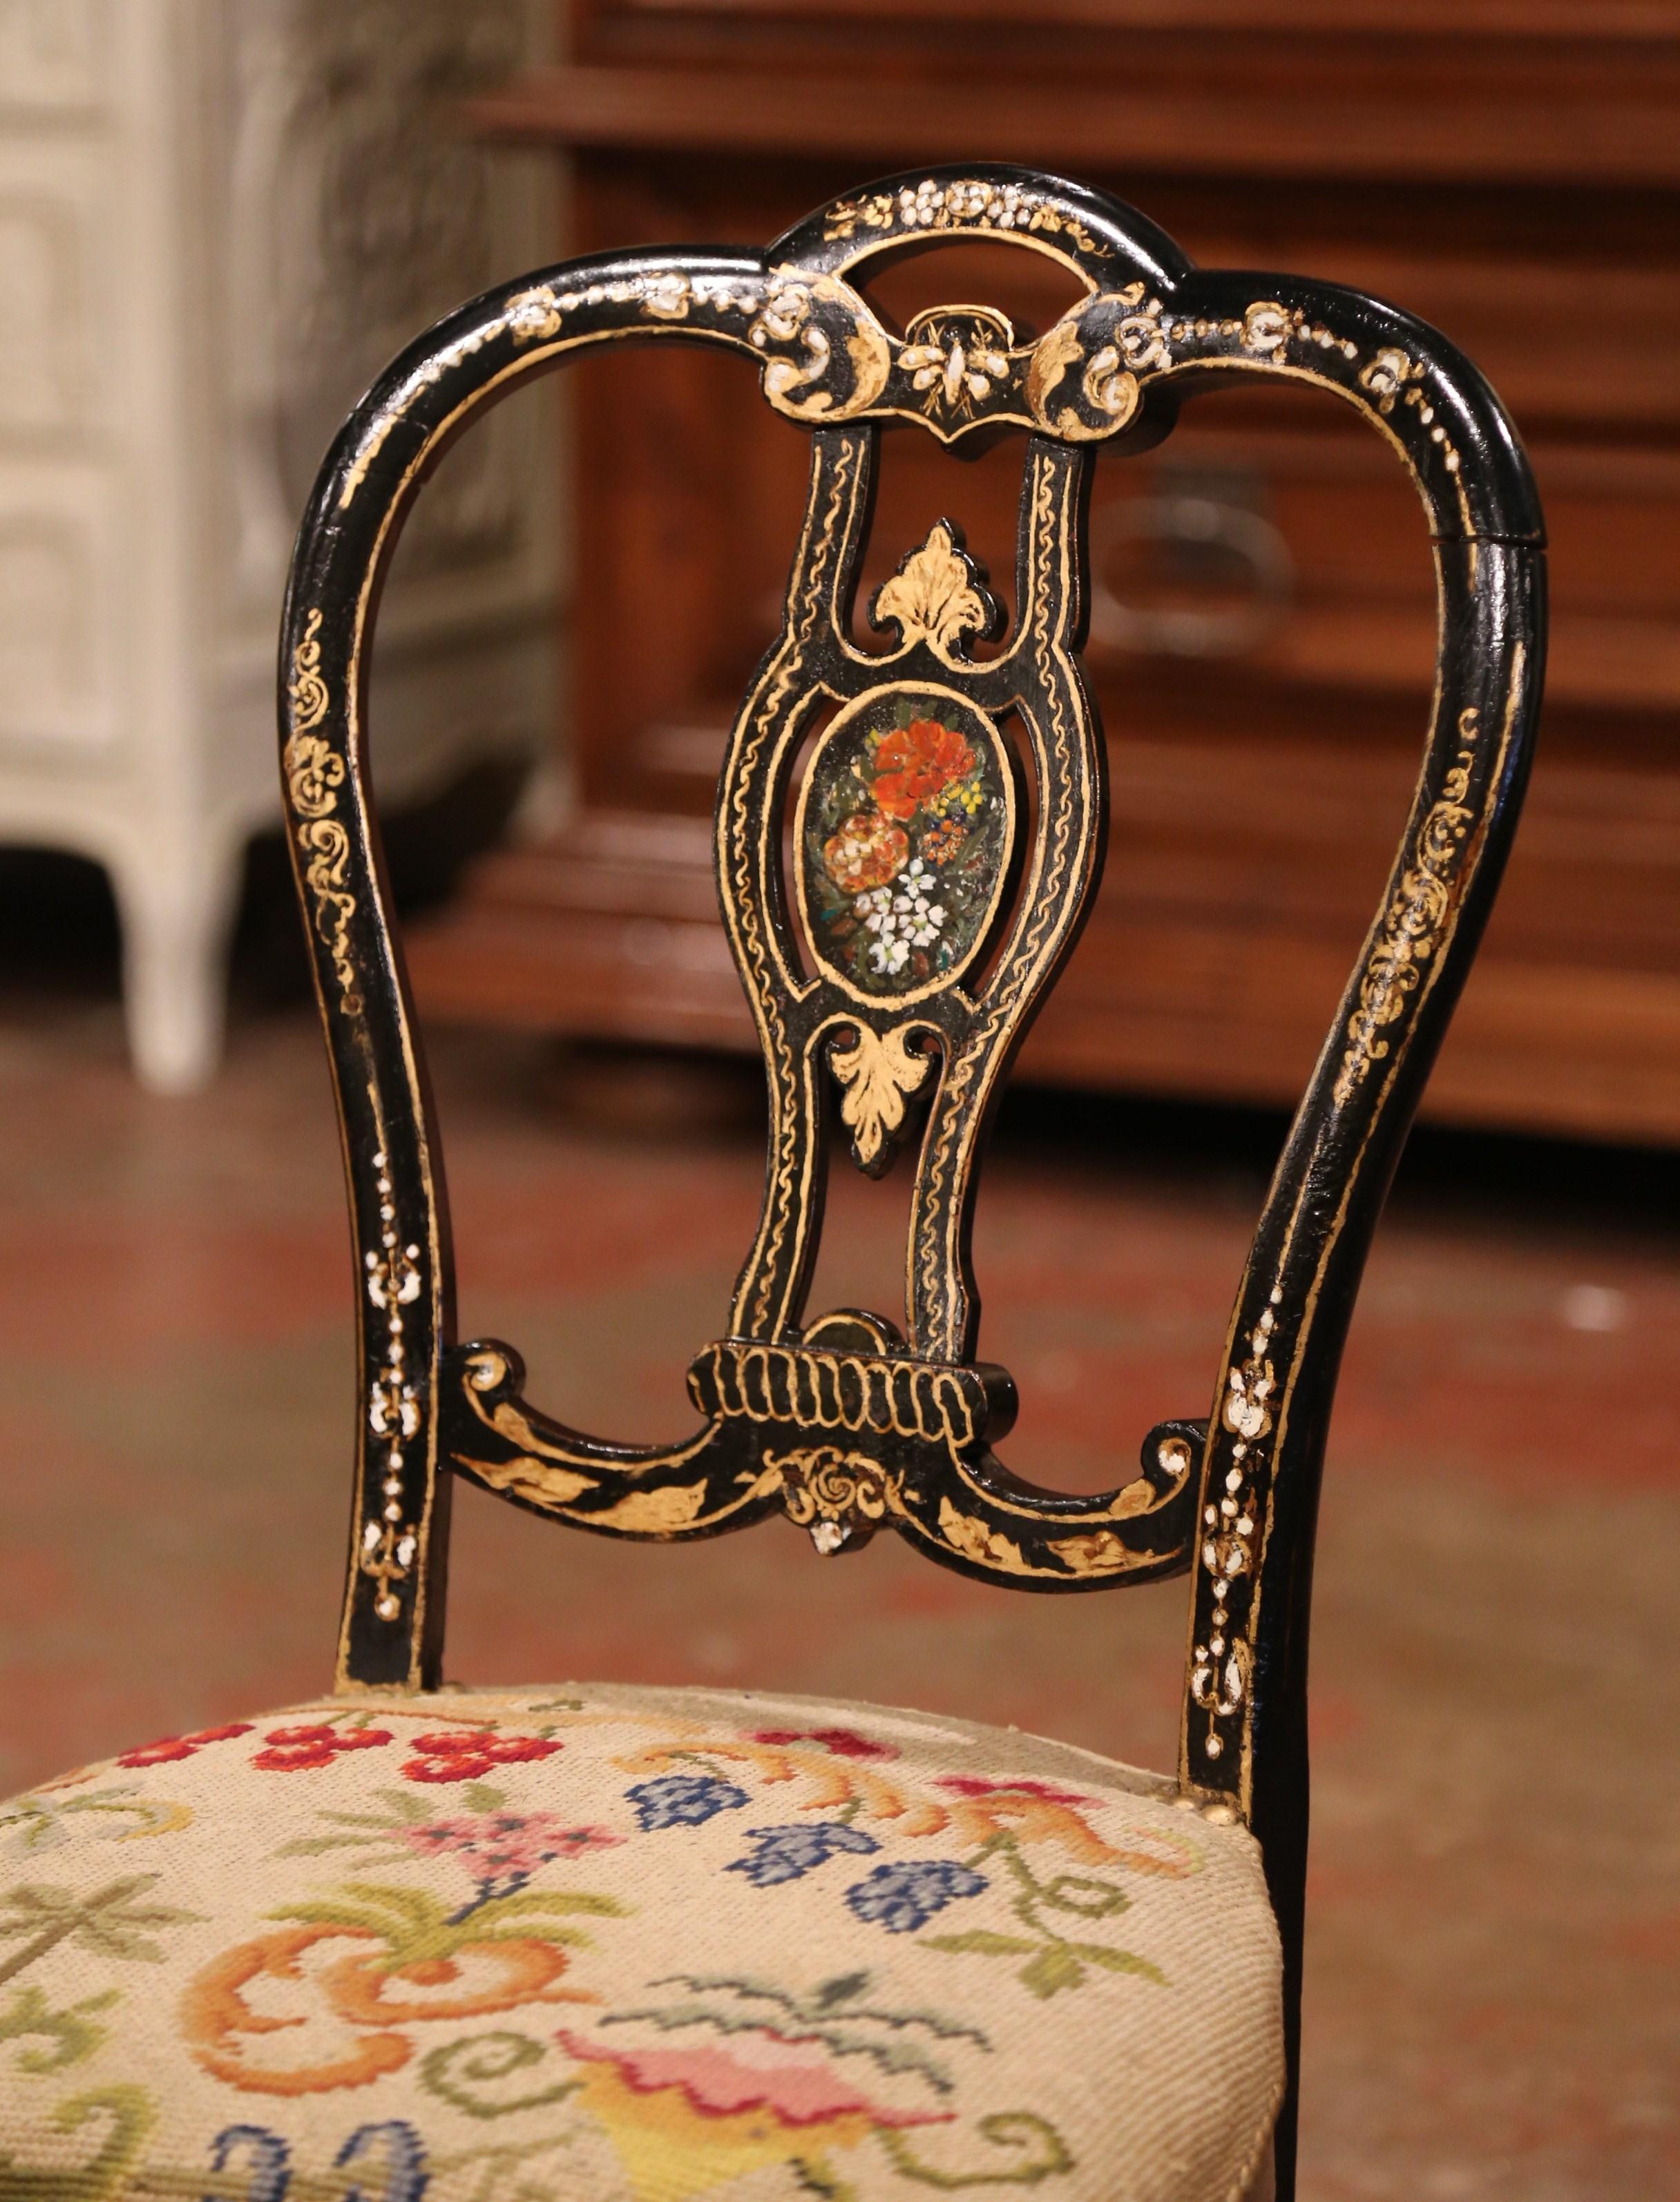 This elegant and colorful antique chair was crafted in France, circa 1870. The petite chair frame stands on four curved legs with carved stretcher over a bombe scalloped apron, and features a ladder back with central spindle. The chair is decorated